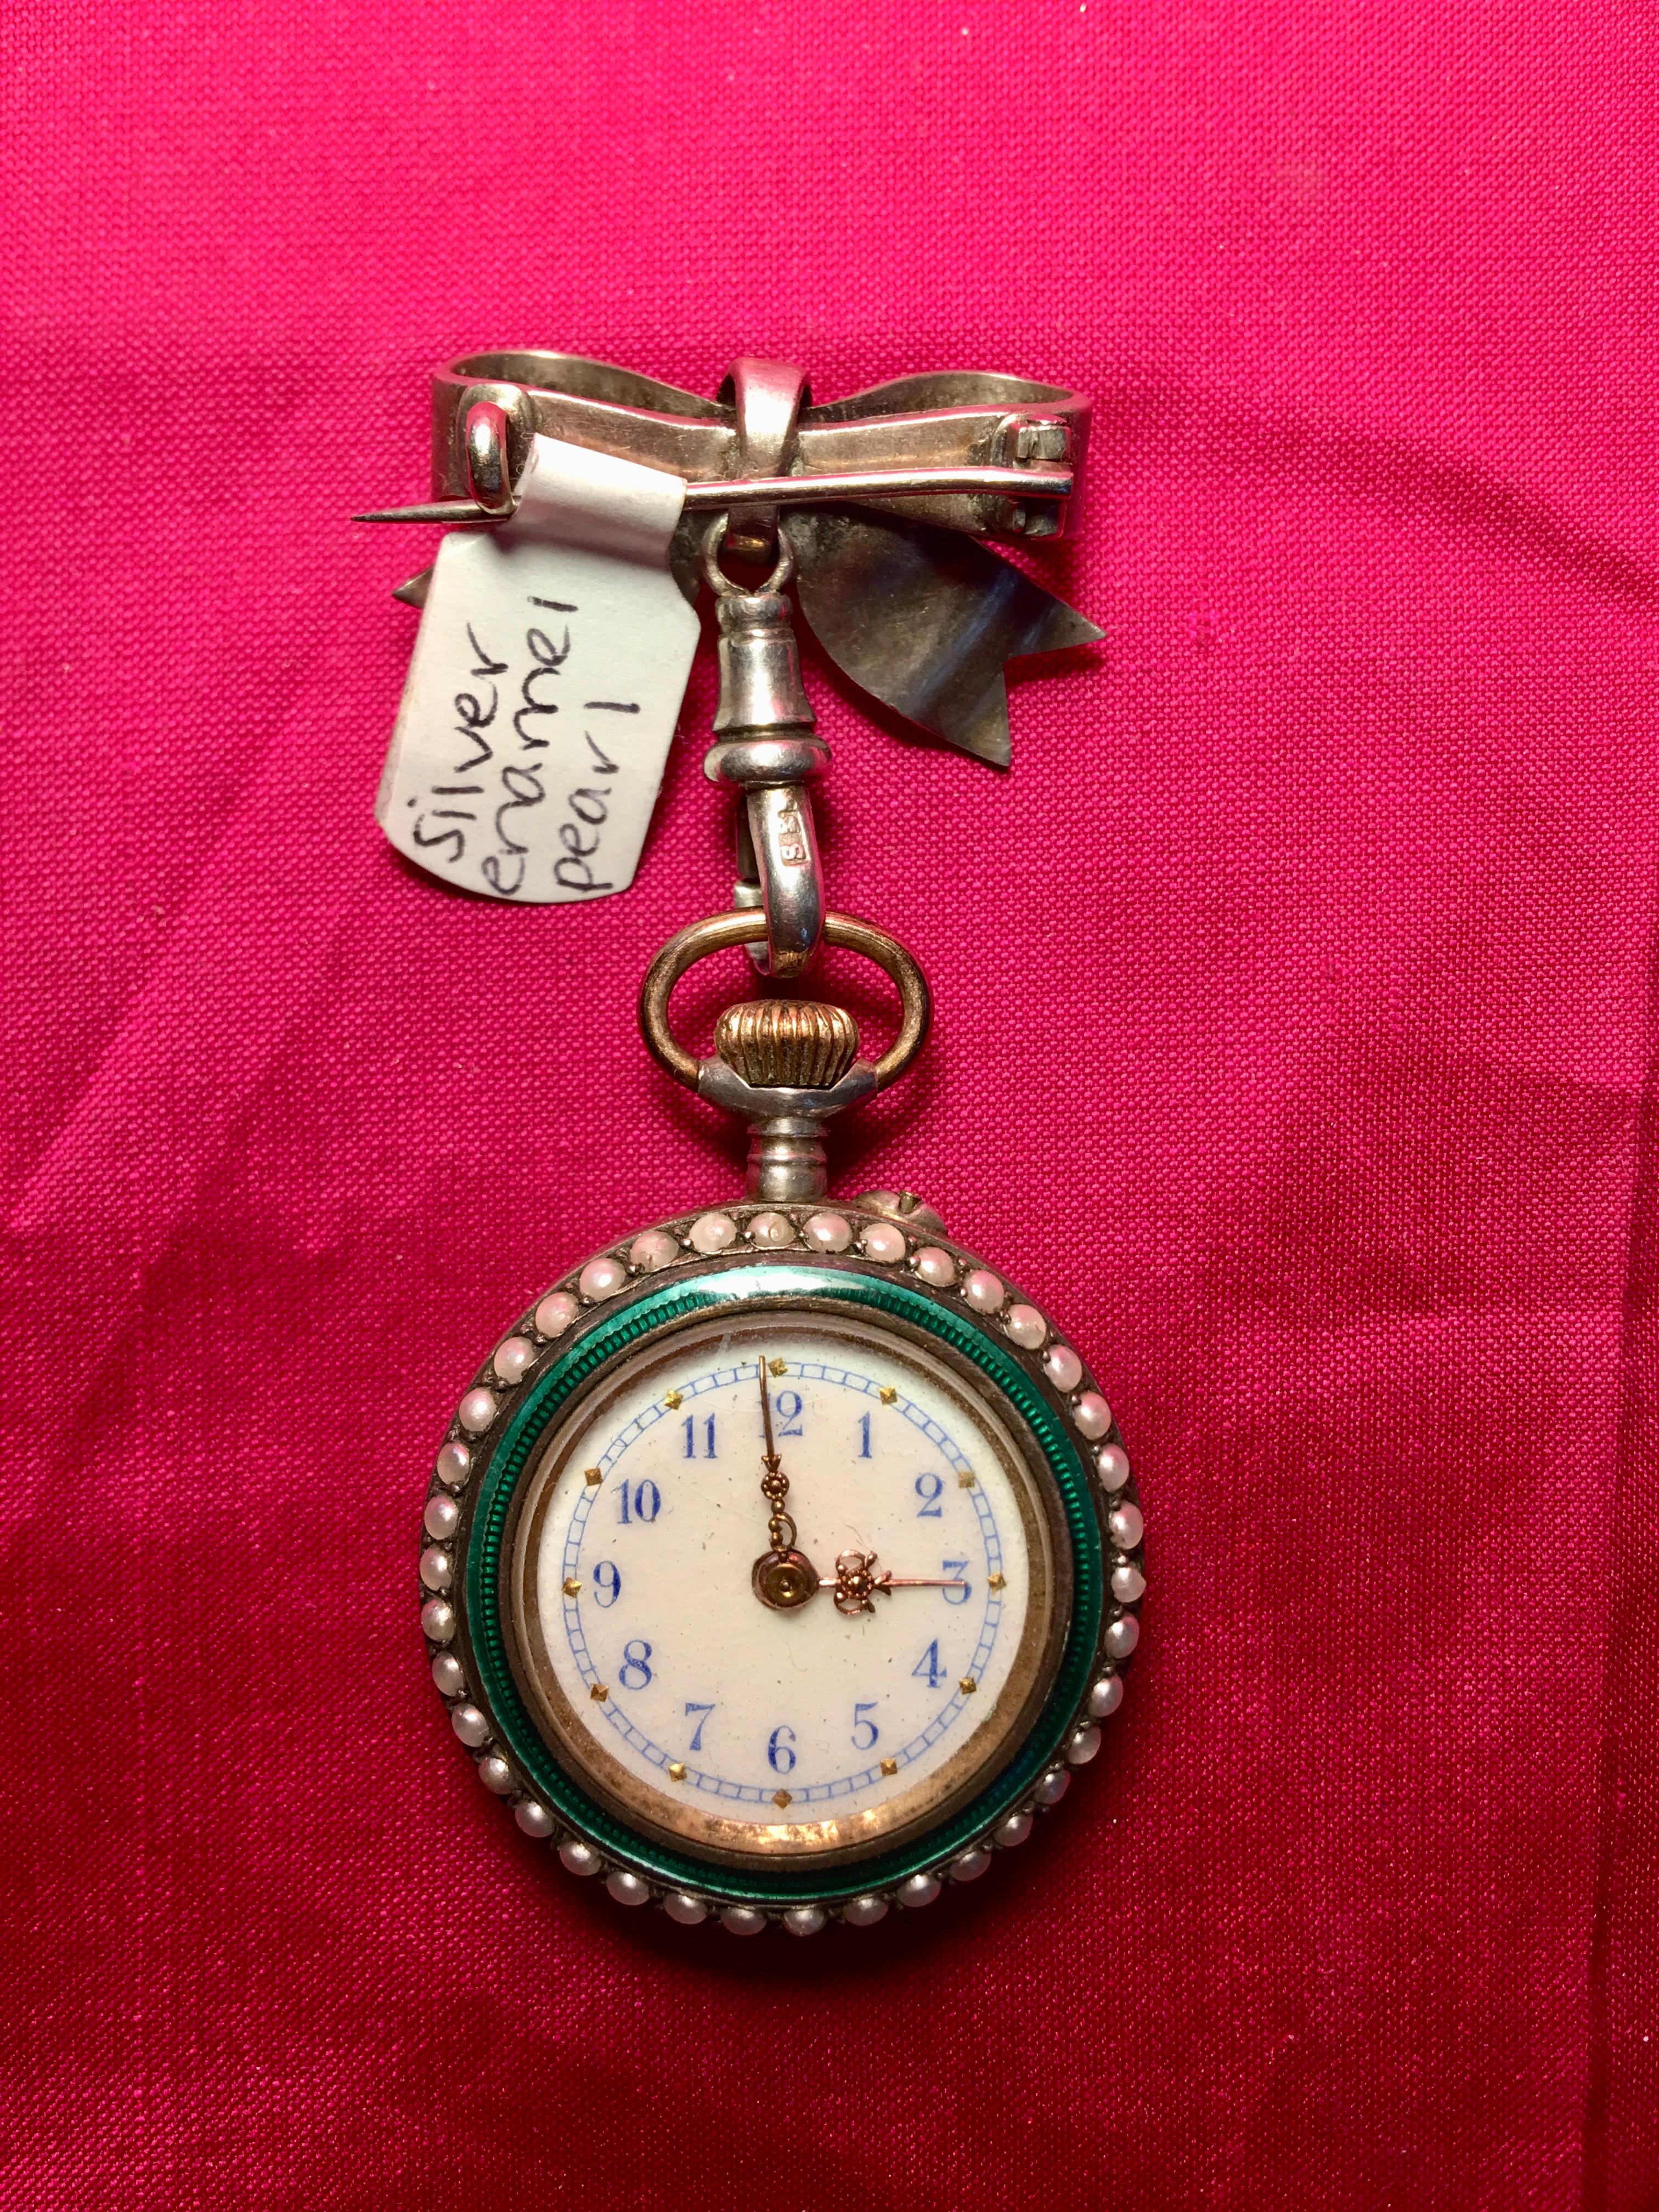 A beautifully handcrafted emerald ladies fob watch. The watch has a lovely enamel dial with Arabic numerals. There are pearls surrounding its outer silver case. It is hand wound with a pin set. At the back of the watch is a wonderful picture of a